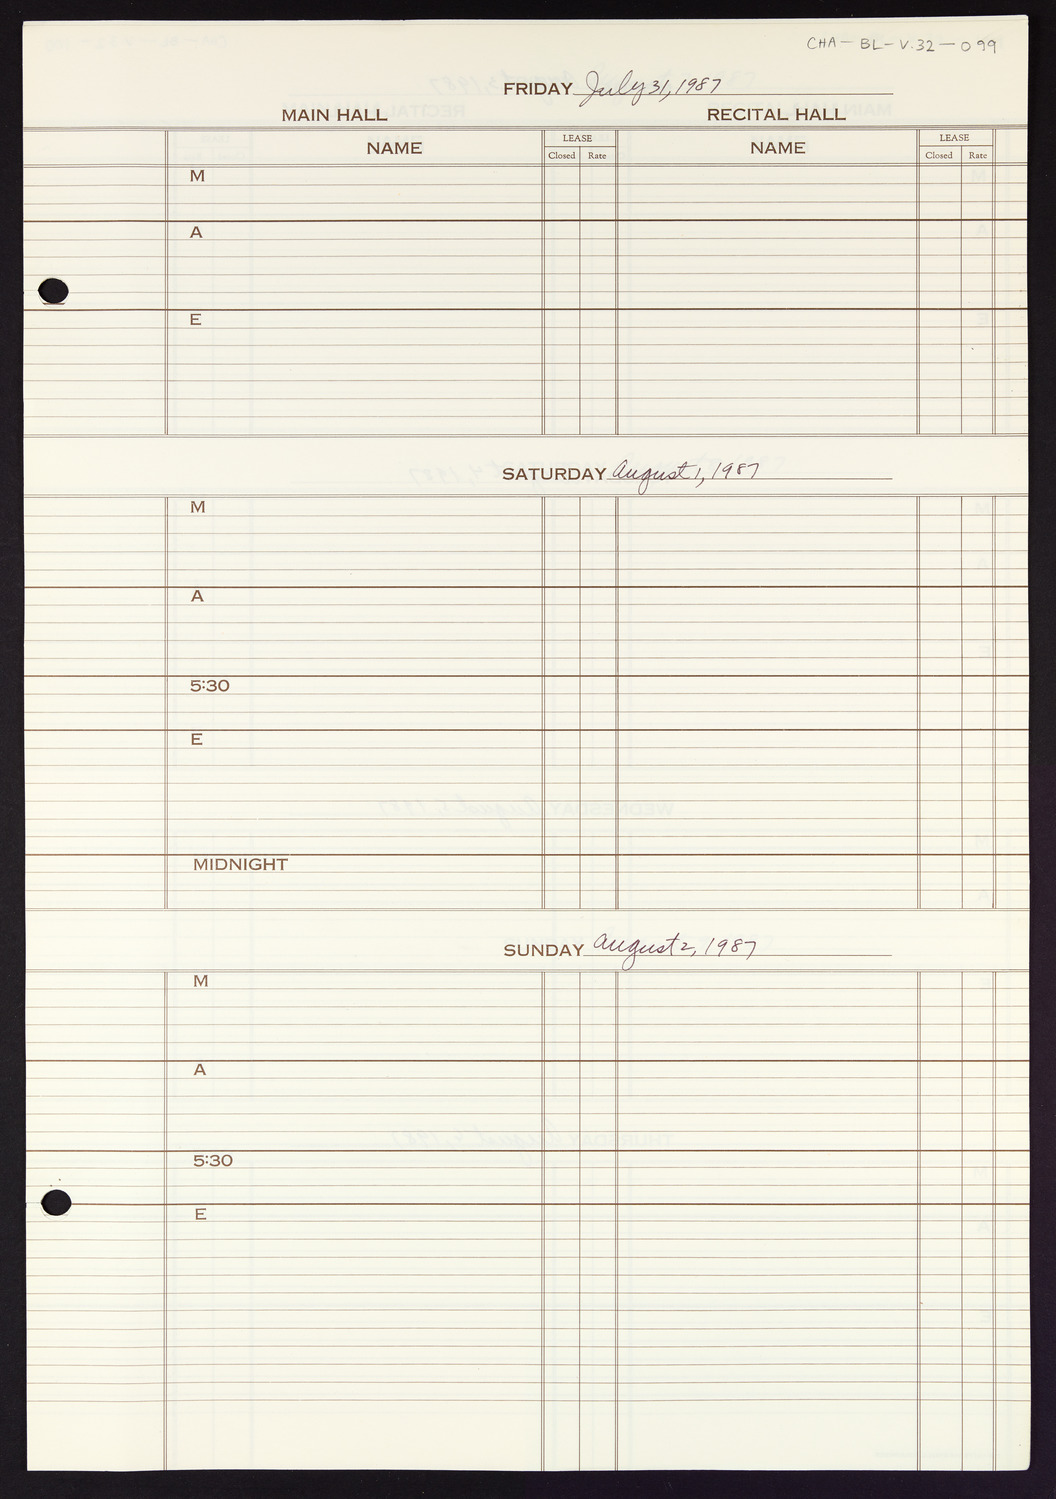 Carnegie Hall Booking Ledger, volume 32, page 99